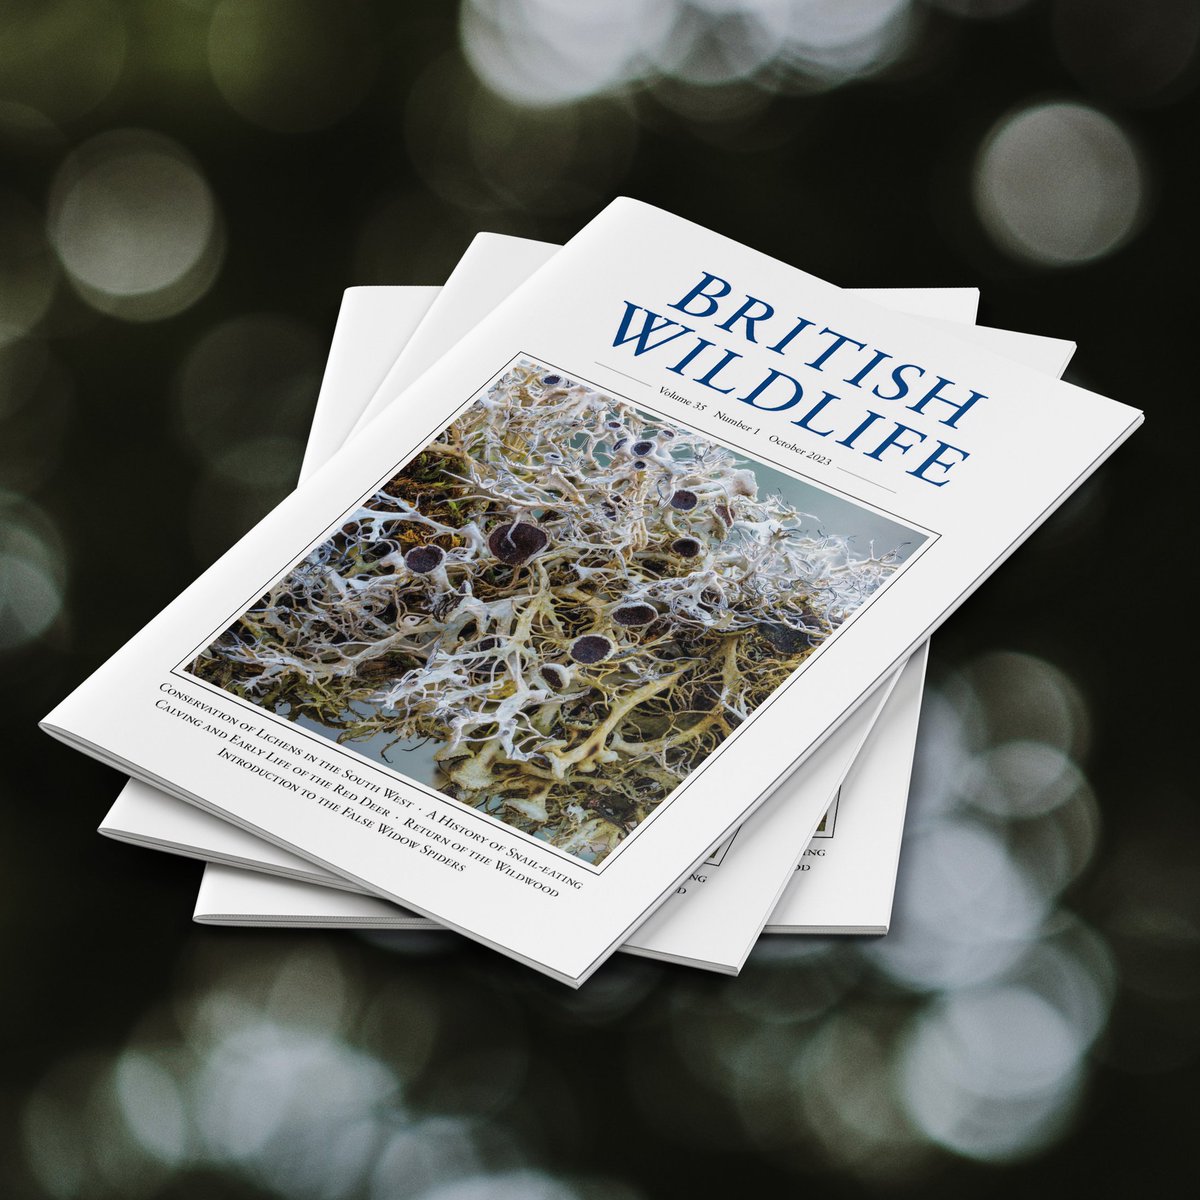 The October issue is now out! Volume 35 begins with the conservation of lichens in south-west England, calving and early life of Red Deer, an introduction to false widow spiders, the return of the wildwood, and much more... Visit britishwildlife.com to find out more